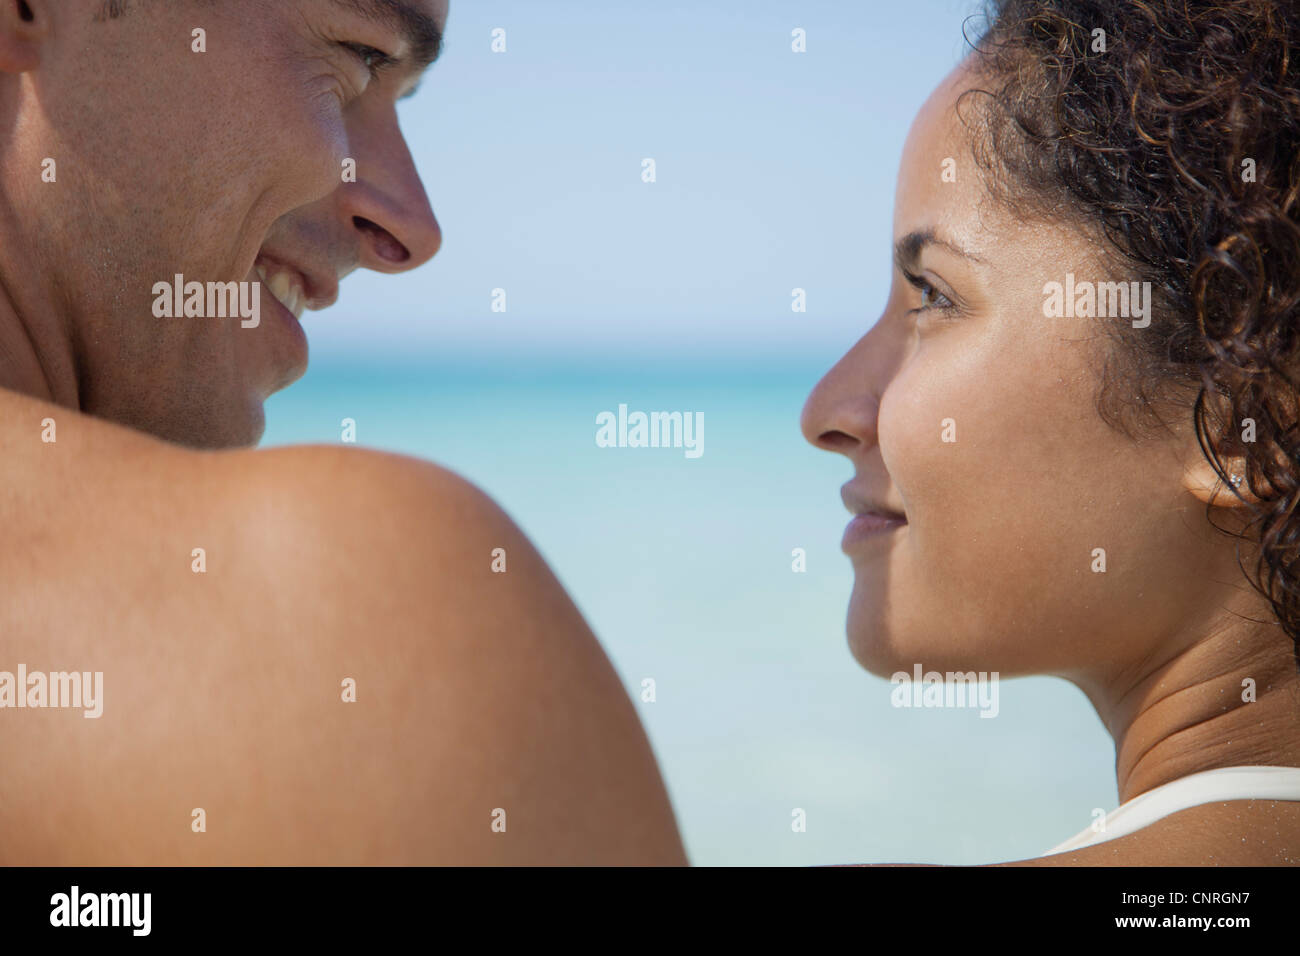 Couple smiling at each other at the beach Stock Photo